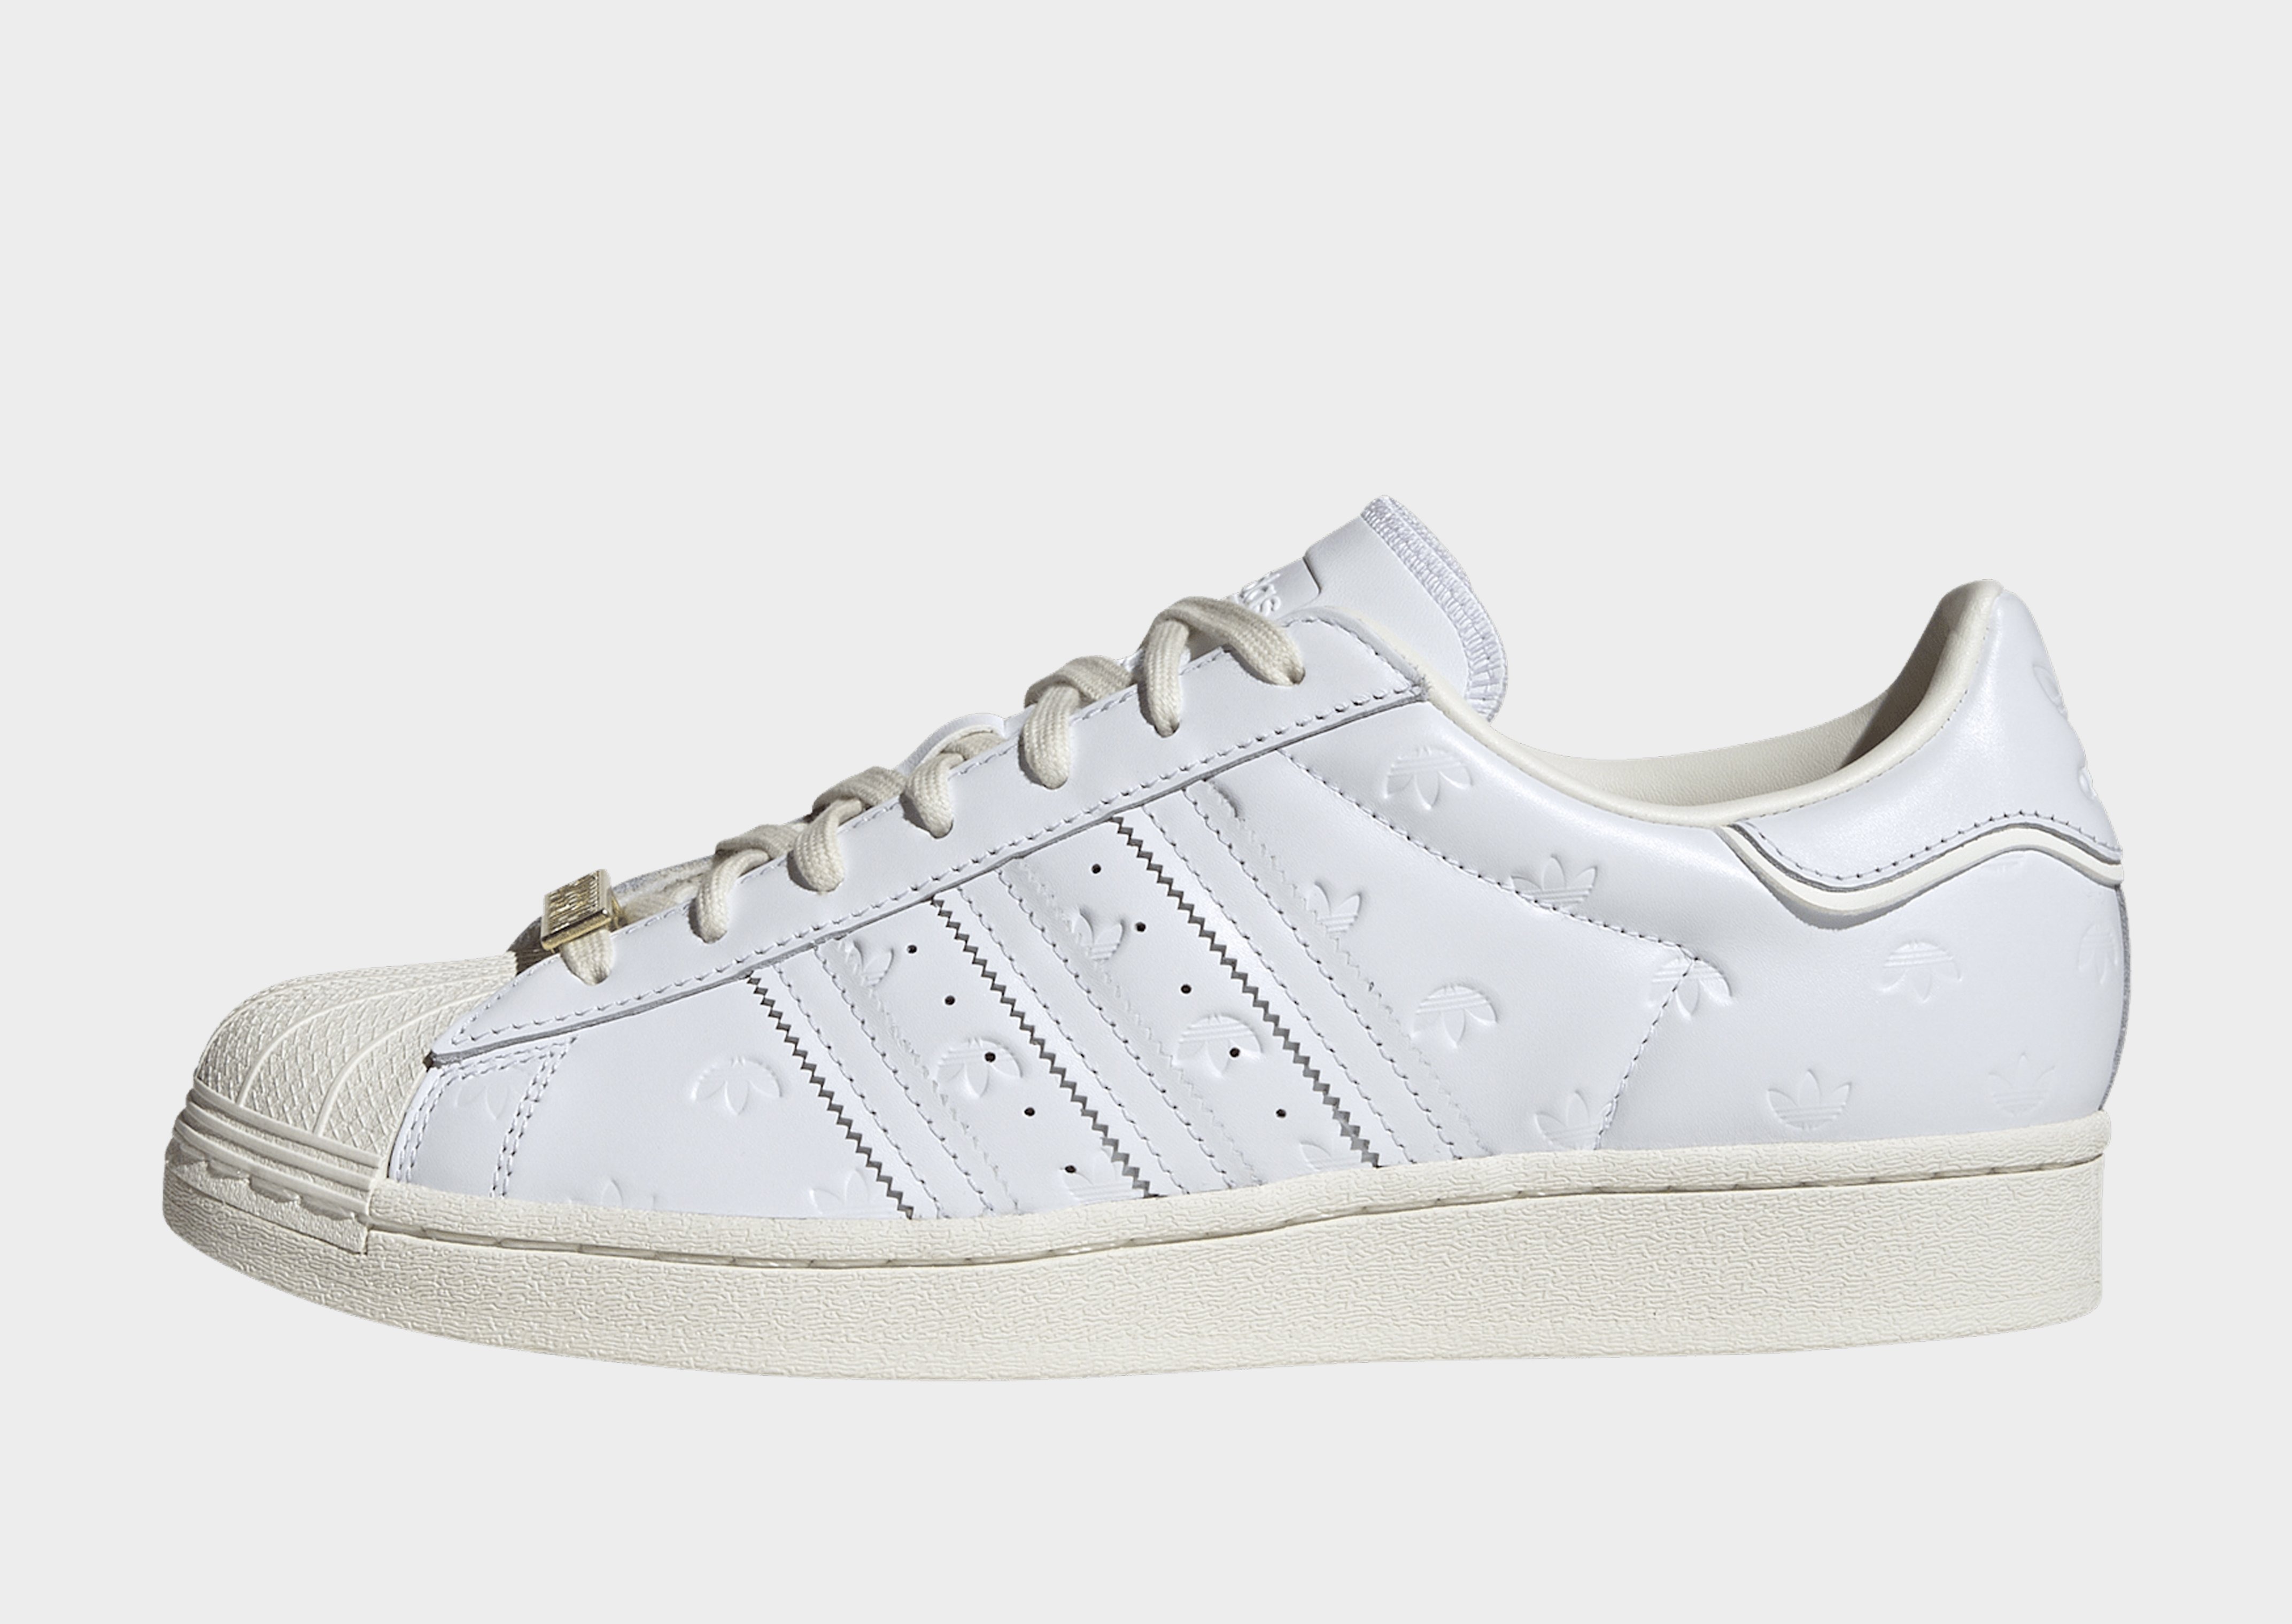 Adidas Original Superstar 80 S White Color Sneakers For Women Bb2056 ...